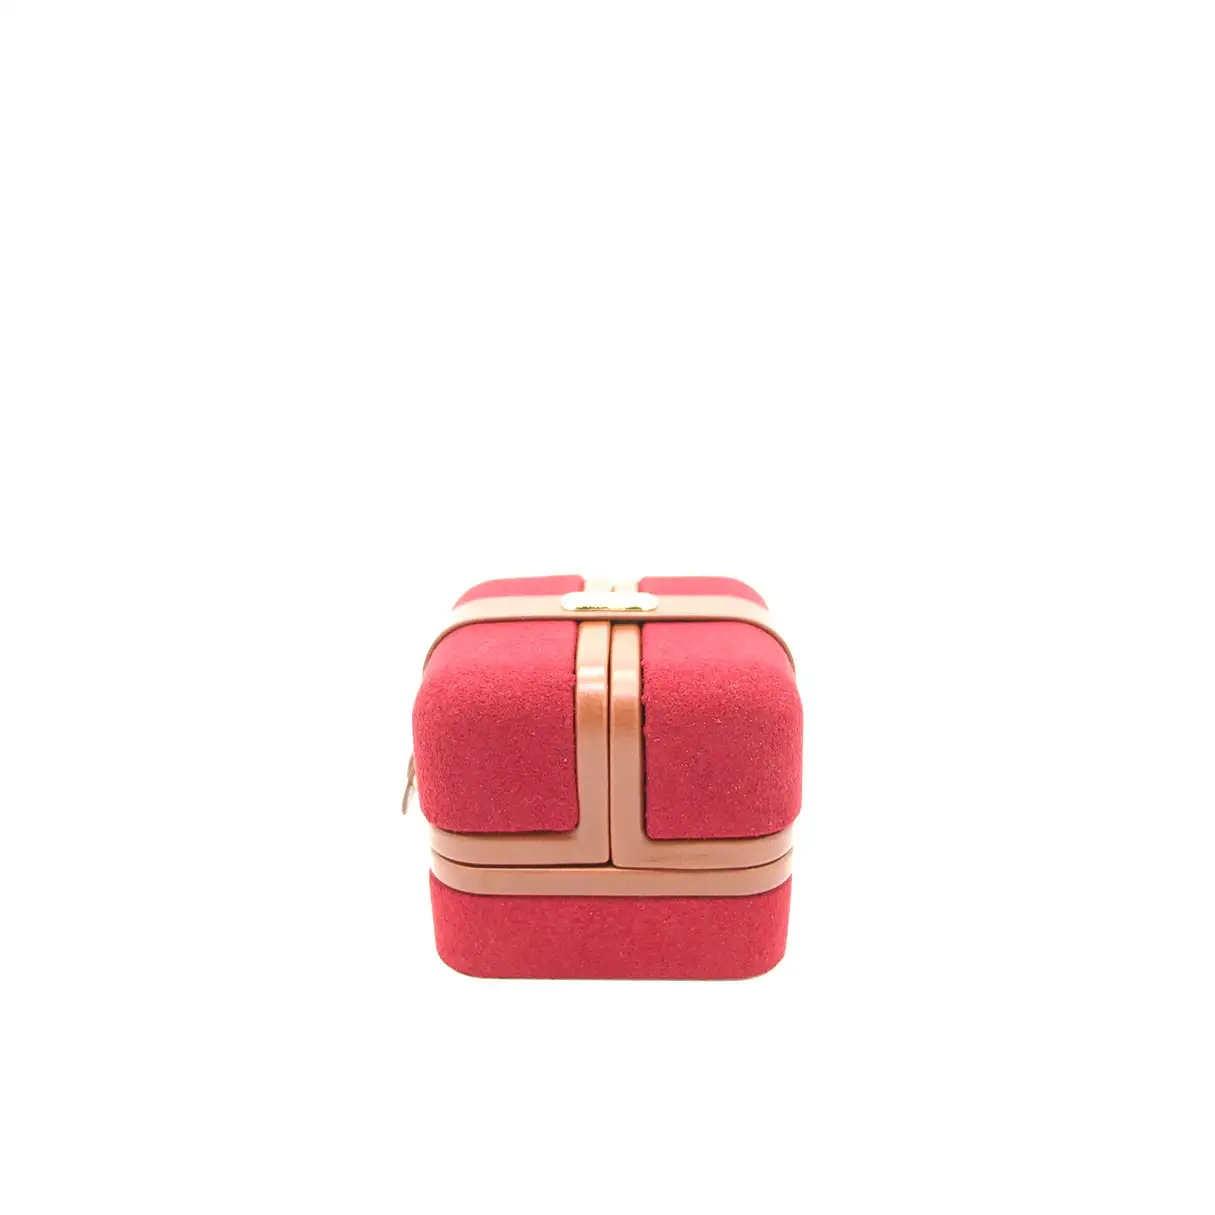 valerie ring box in red front view